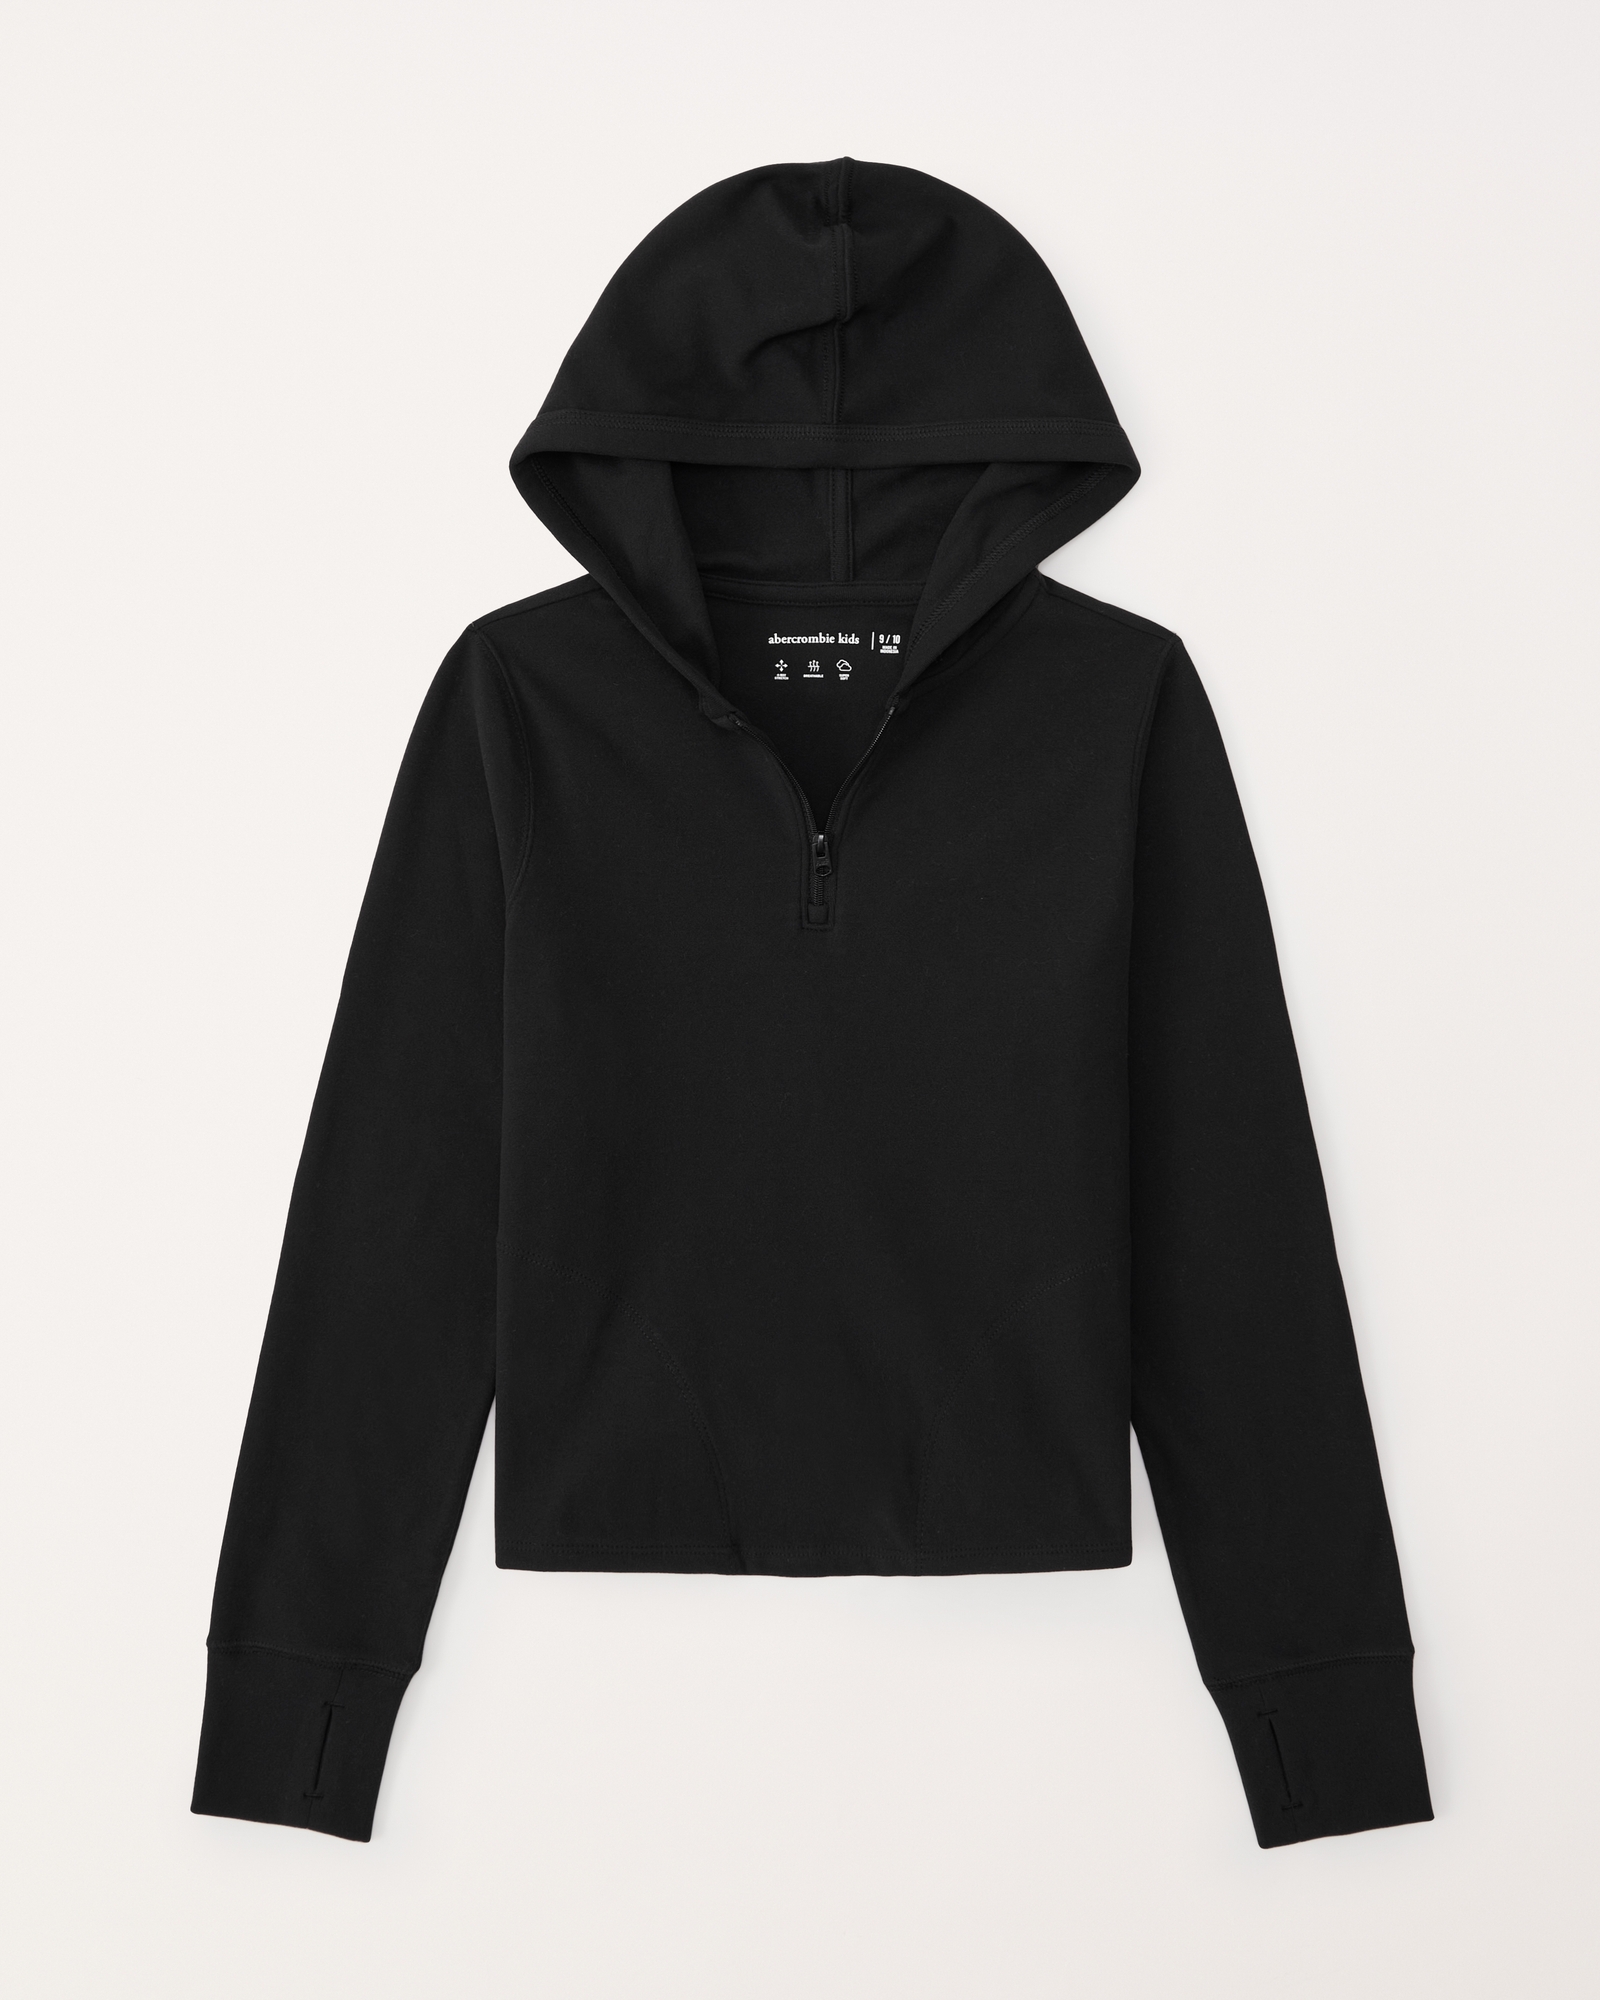 Cozy All Day: The Joy of Abercrombie's Oversized Sweatshirt and